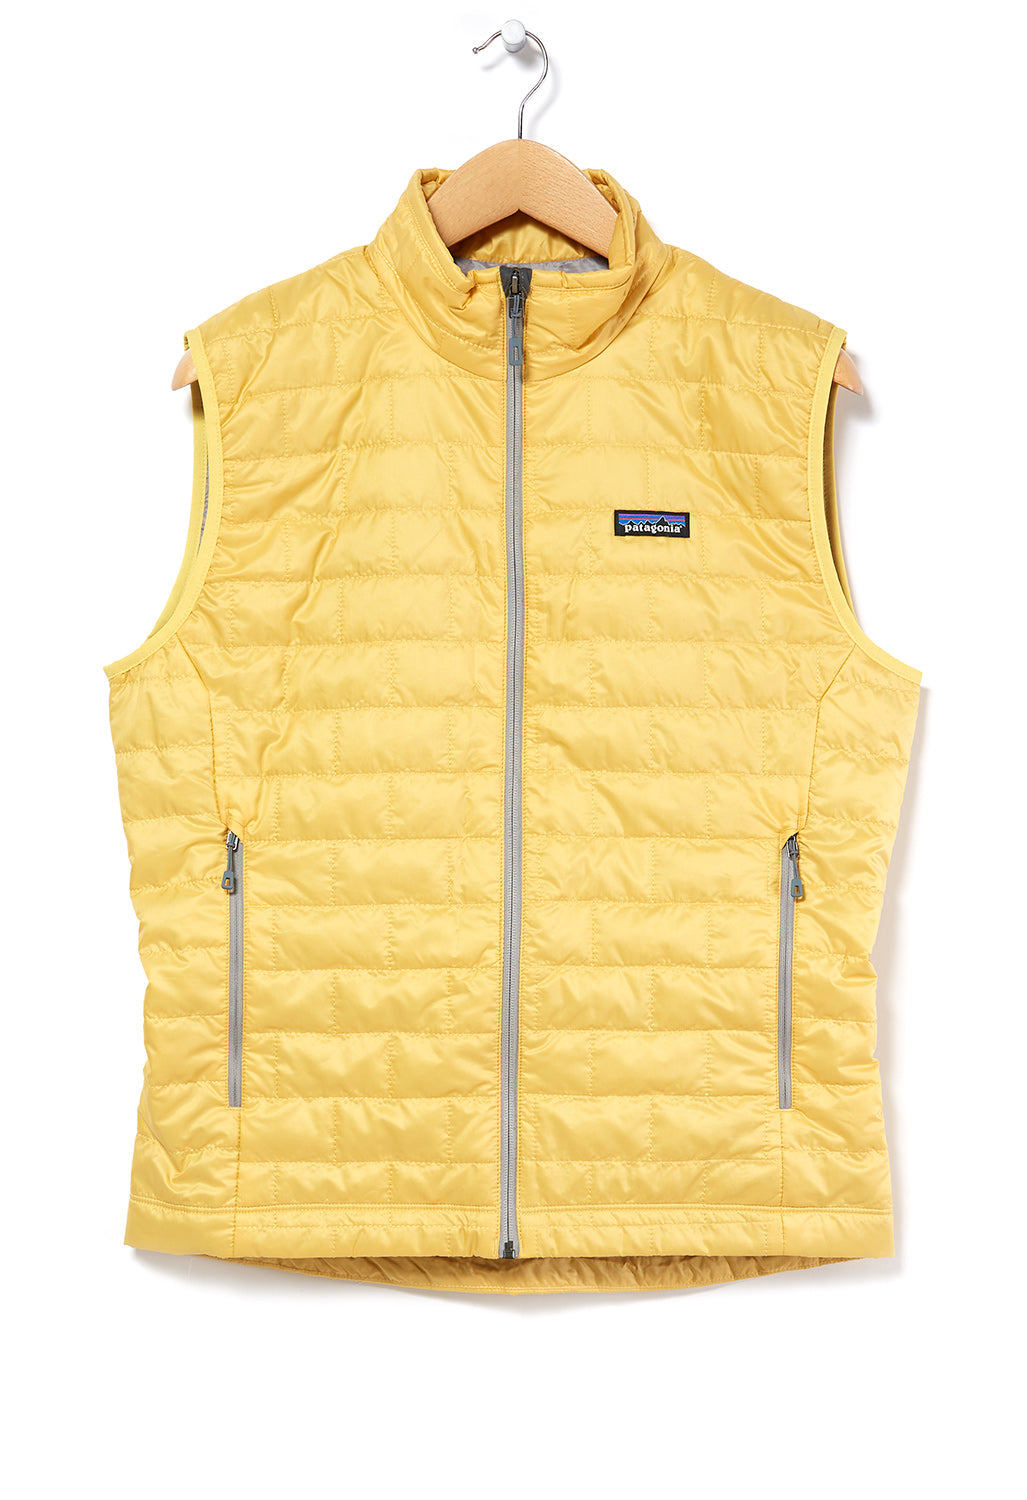 Patagonia Nano Puff Insulated Vest - Women's - Clothing